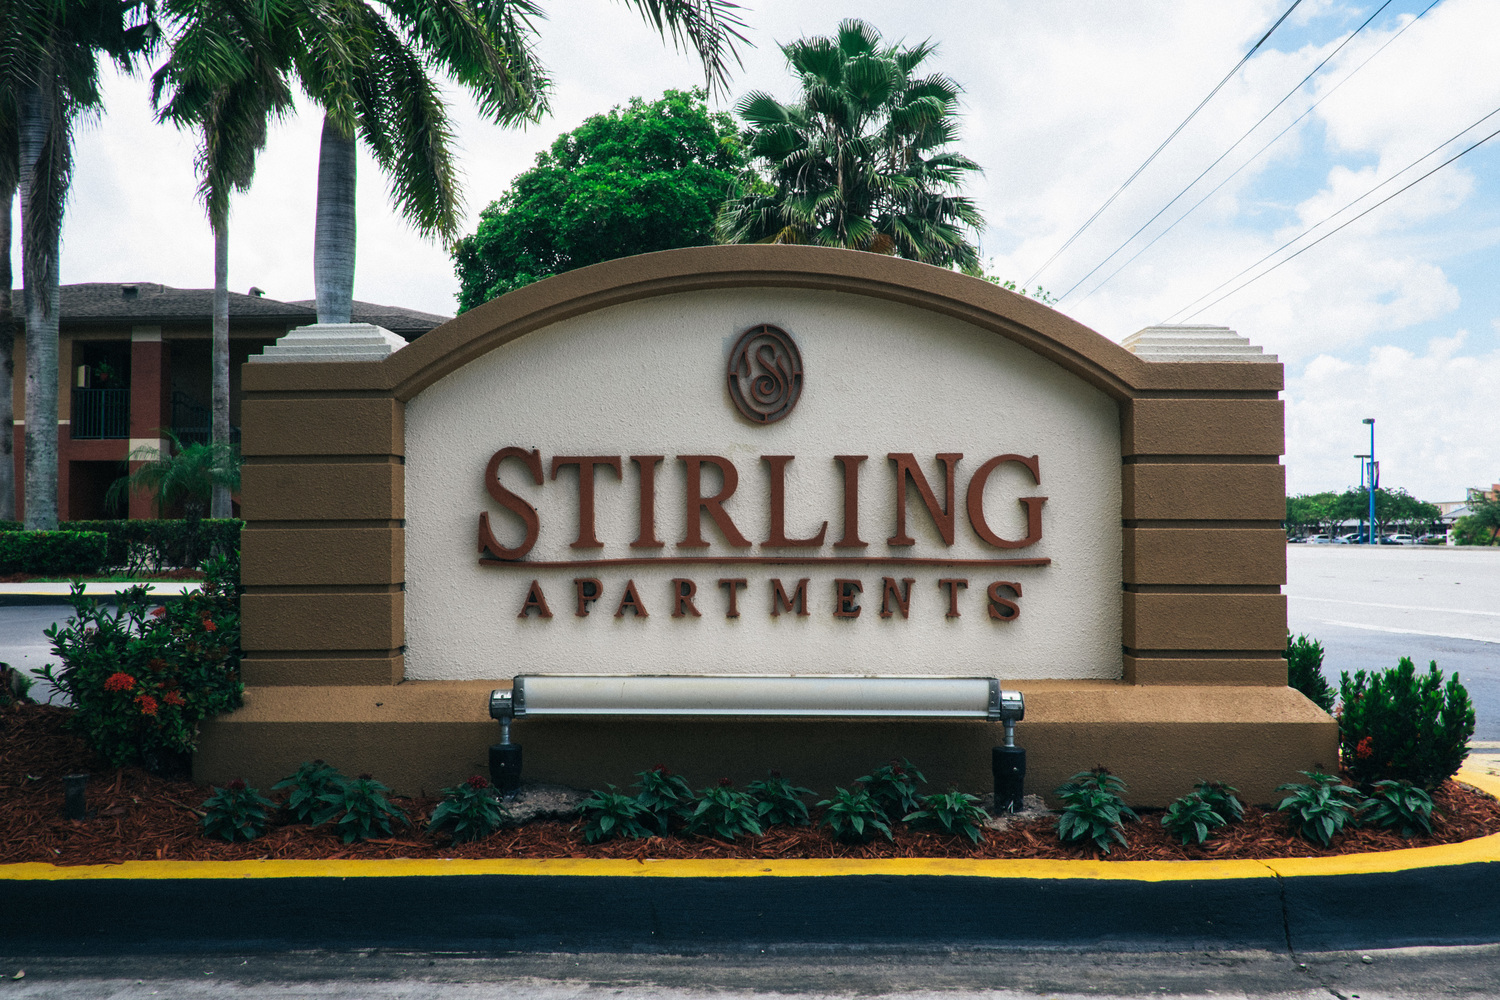 STIRLING APARTMENTS